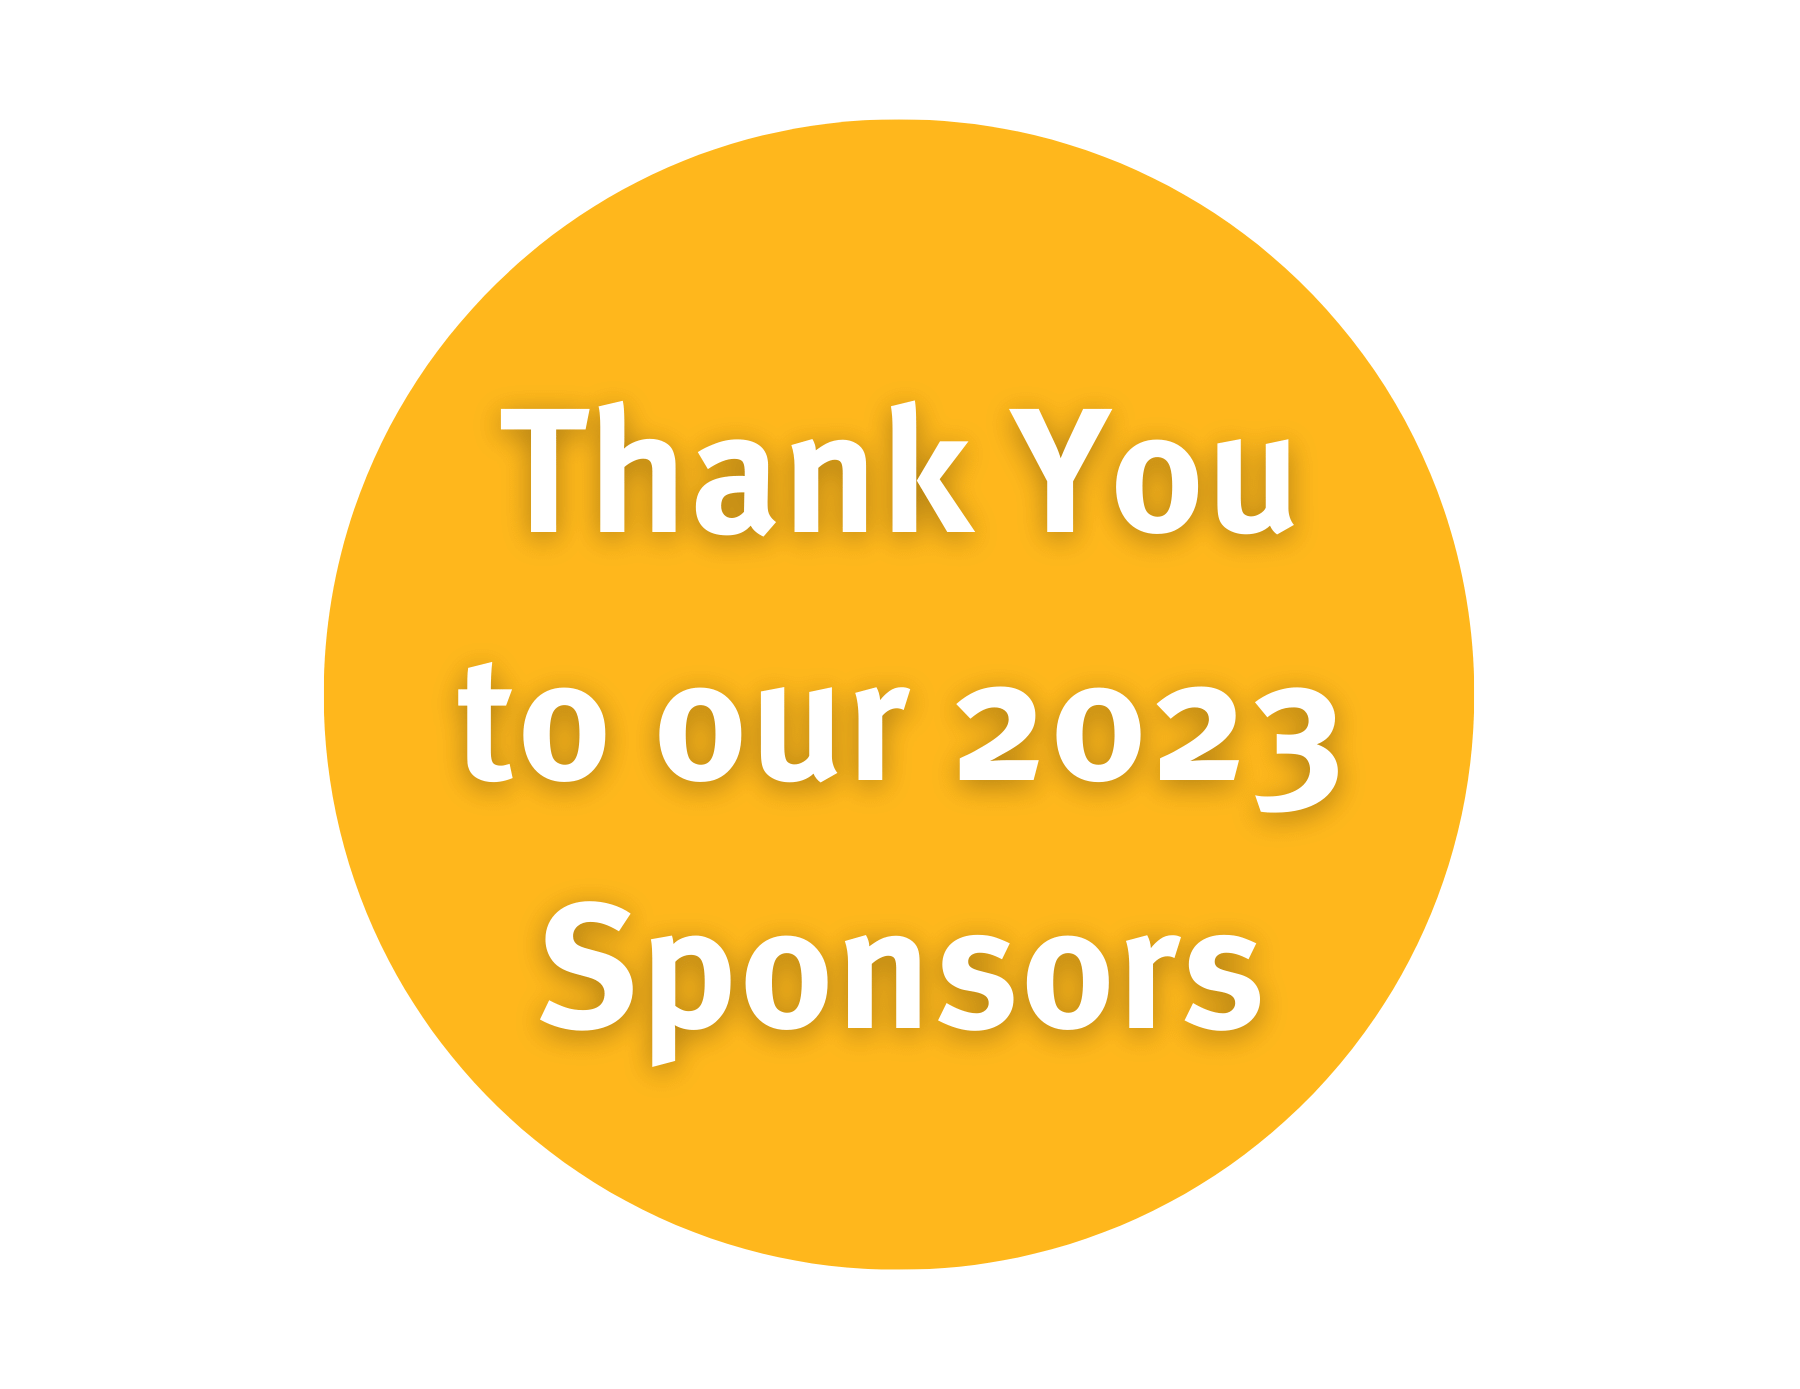 Thank you to our 2023 Sponsors